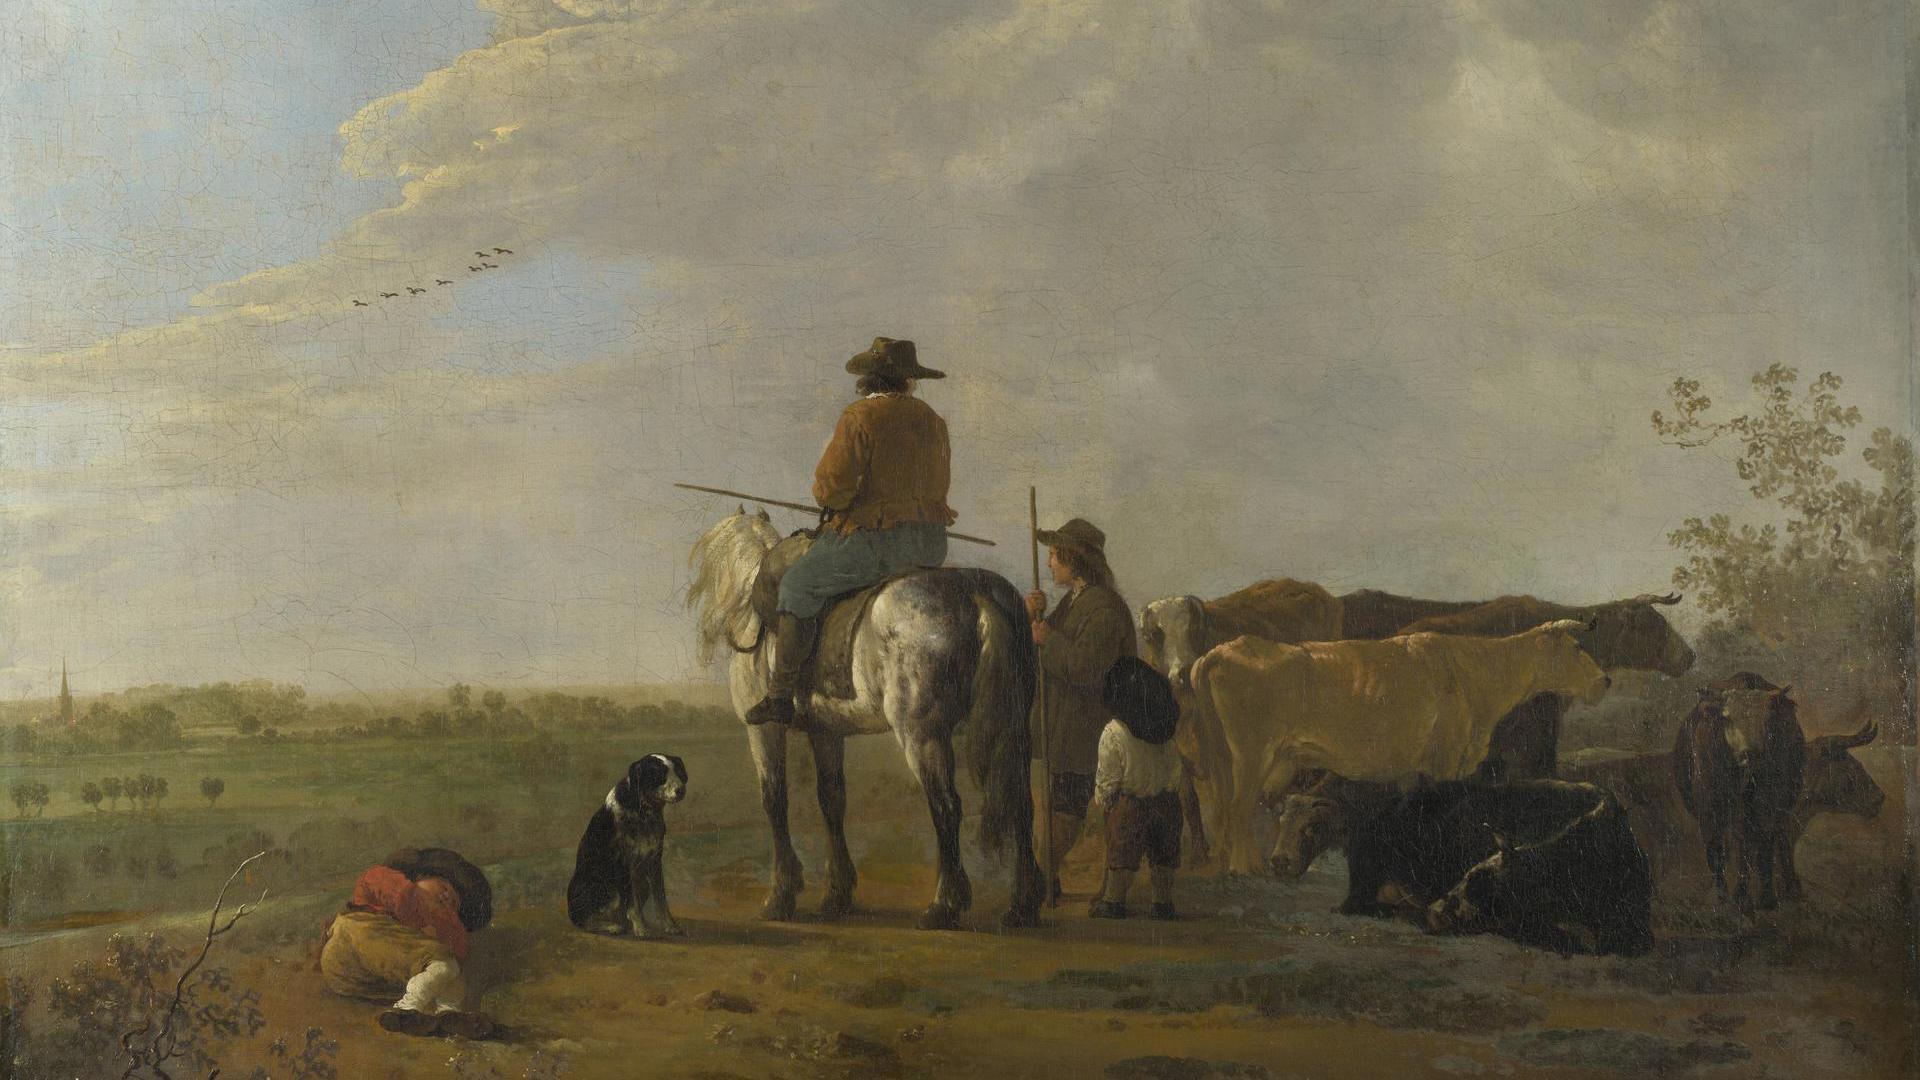 A Landscape with Horseman, Herders and Cattle by Aelbert Cuyp